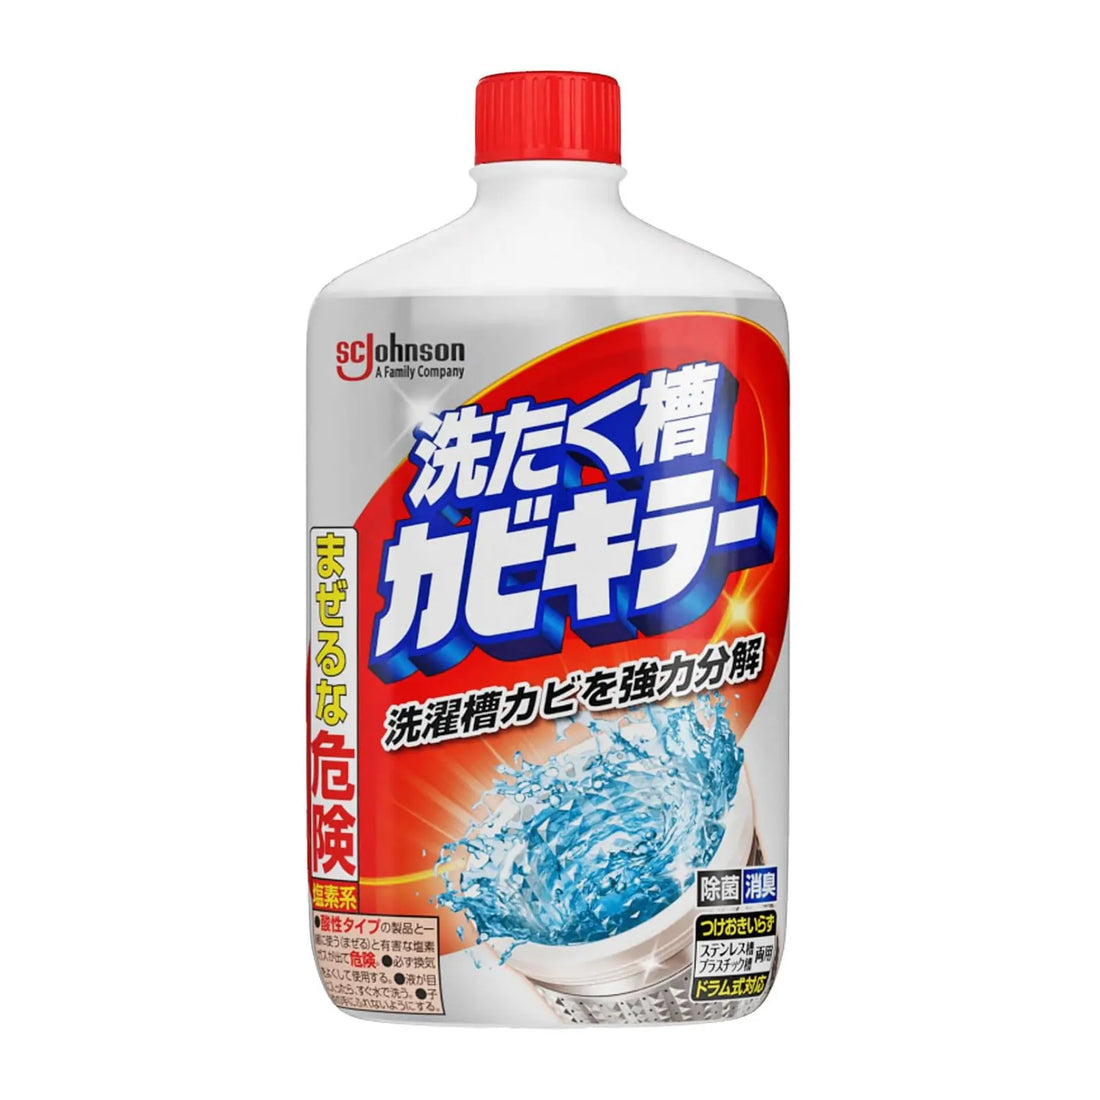 Revitalise your washing machine with Johnson Washing Machine Cleaner! Penetrates deep to decompose and eradicate mould, while eliminating 99.9% of spores. Thoroughly disinfects, deodorises, and removes residue for a fresh laundry experience. Compatible with stainless steel drums, perfect for top and front loaders. Liquid type